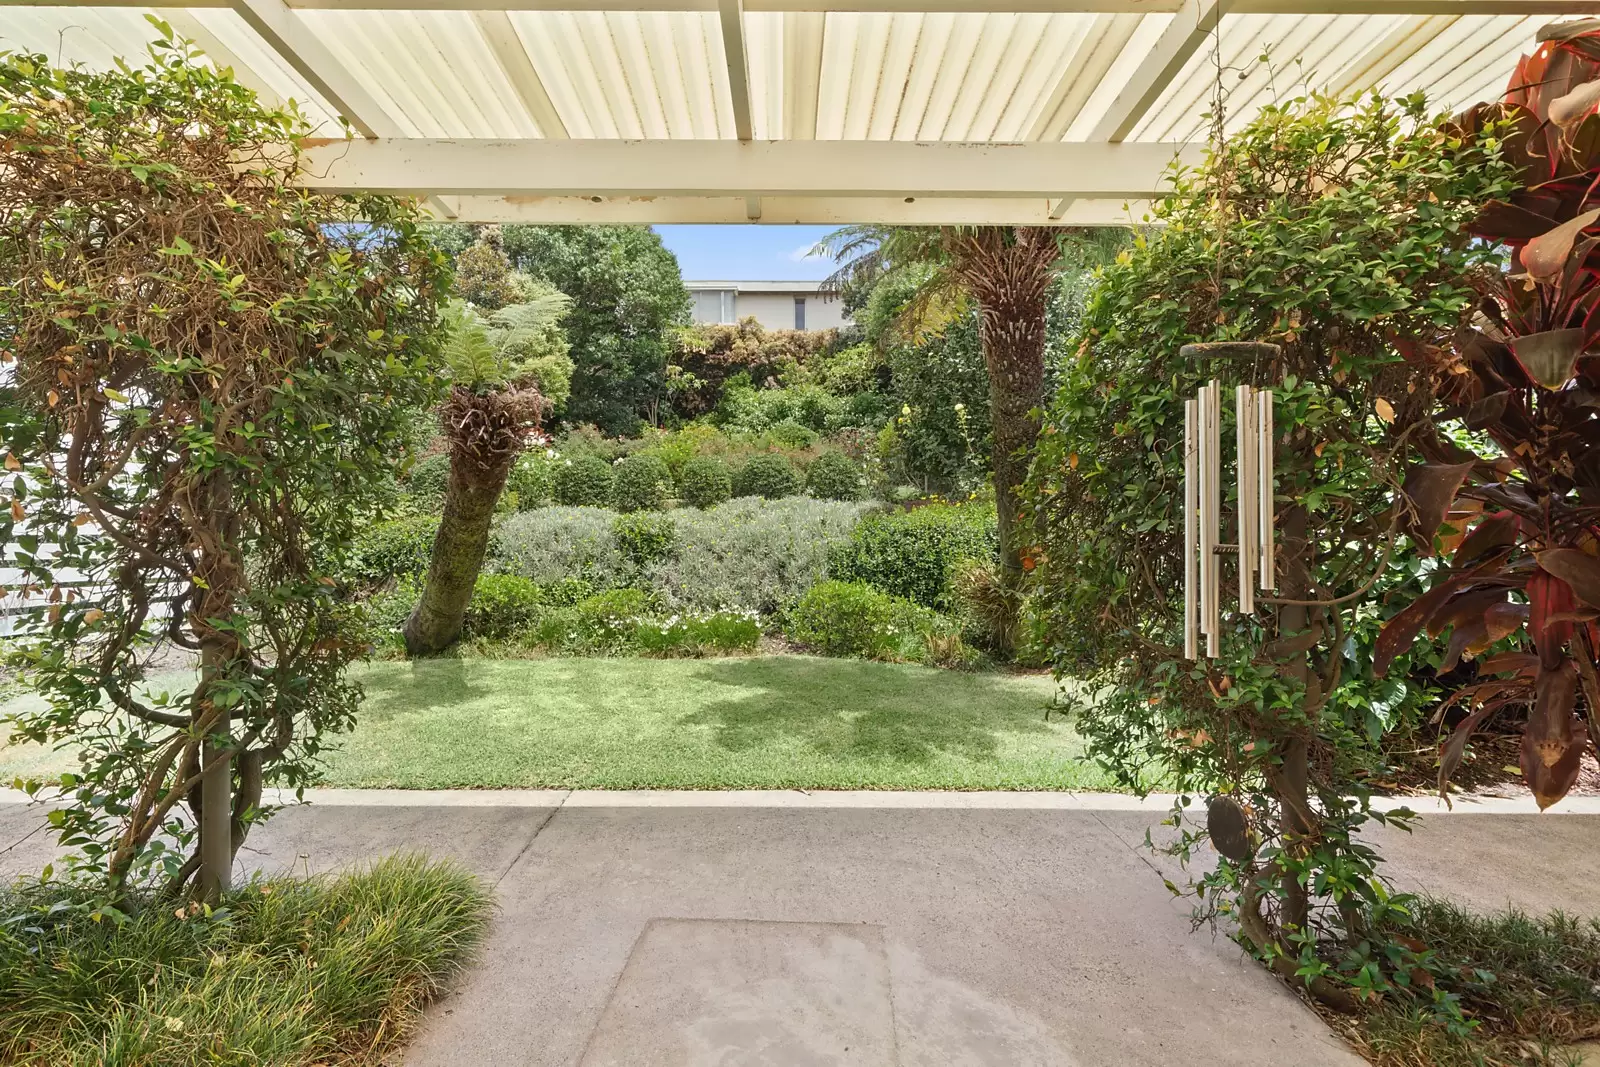 Photo #16: 5 Parsley Road, Vaucluse - Sold by Sydney Sotheby's International Realty